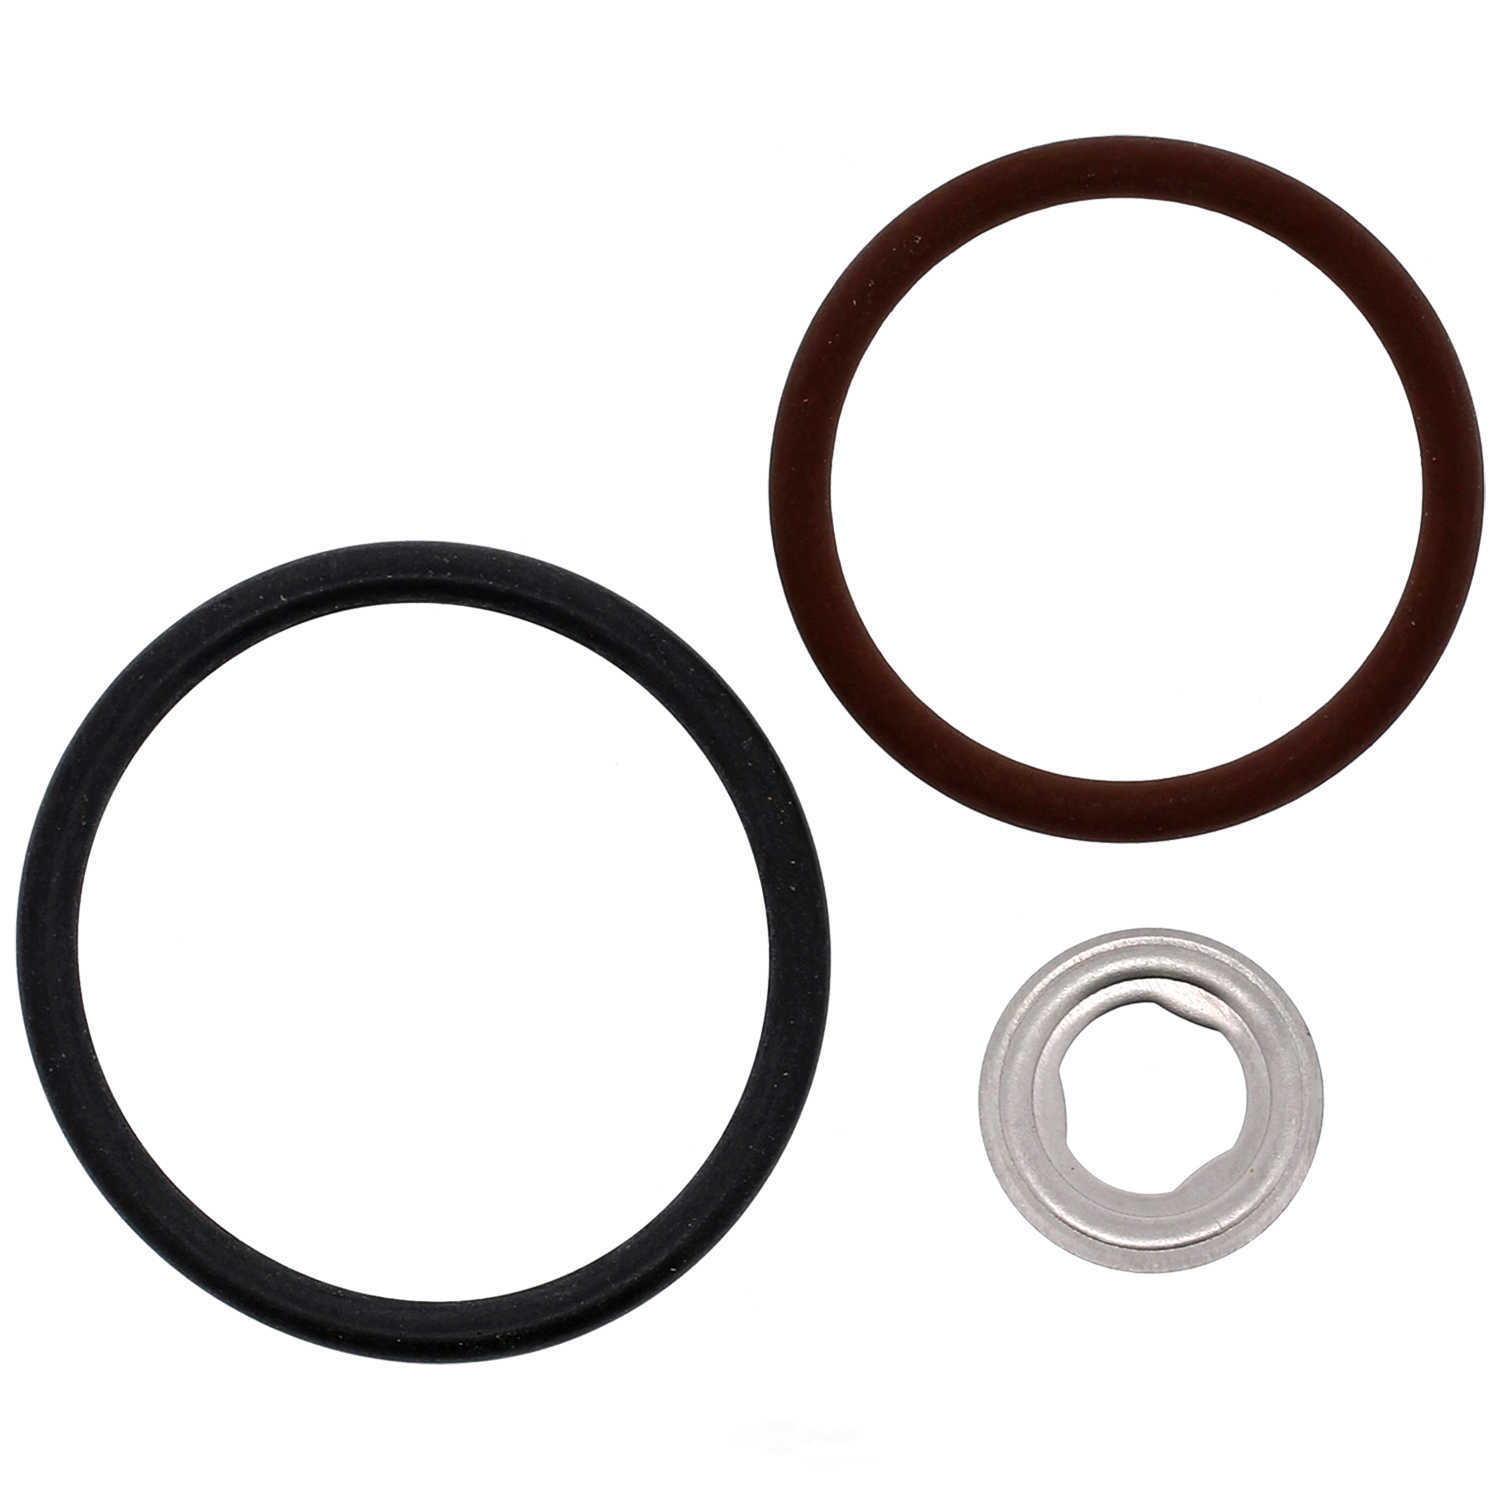 GB REMANUFACTURING INC. - Fuel Injector Seal Kit - GBR 522-066